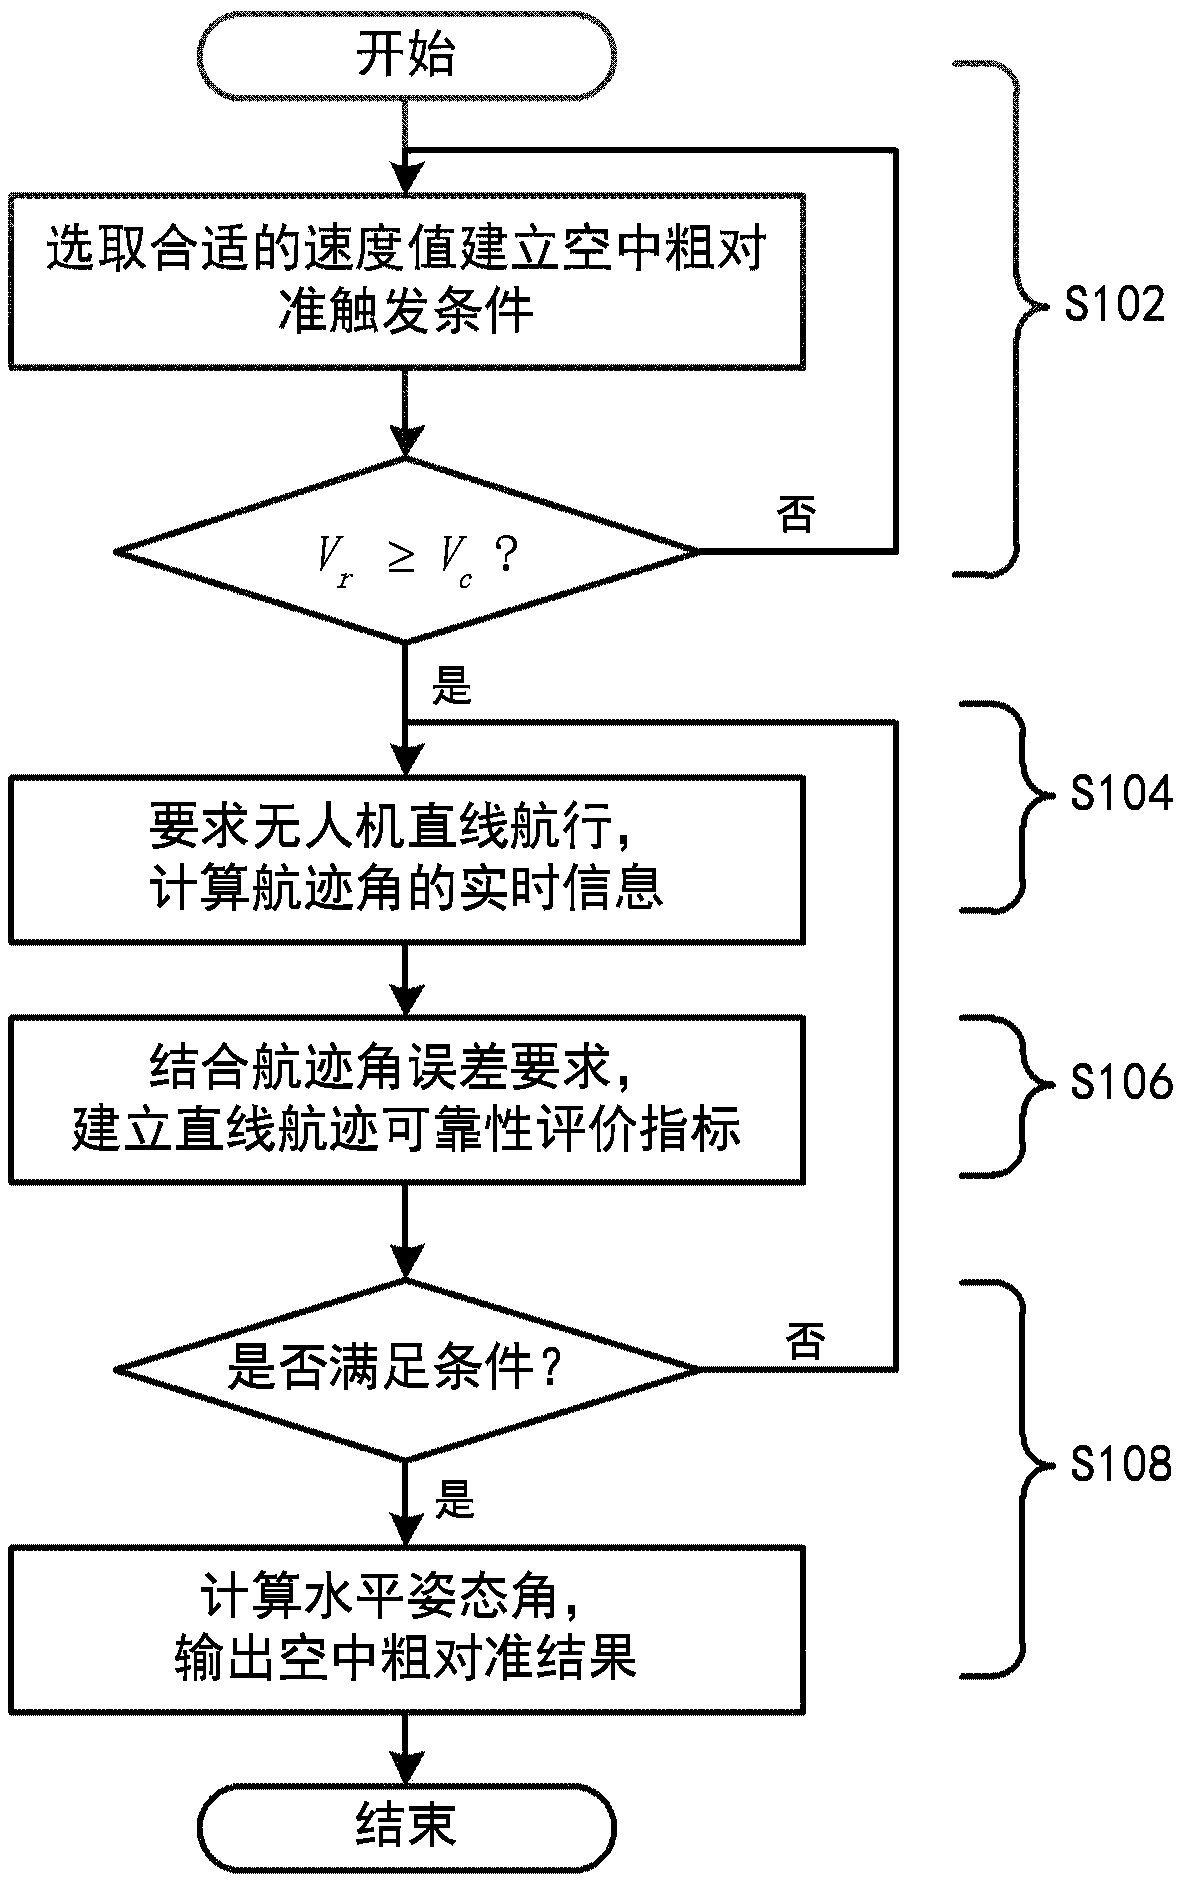 Method of air coarse alignment based on straight-line trajectory